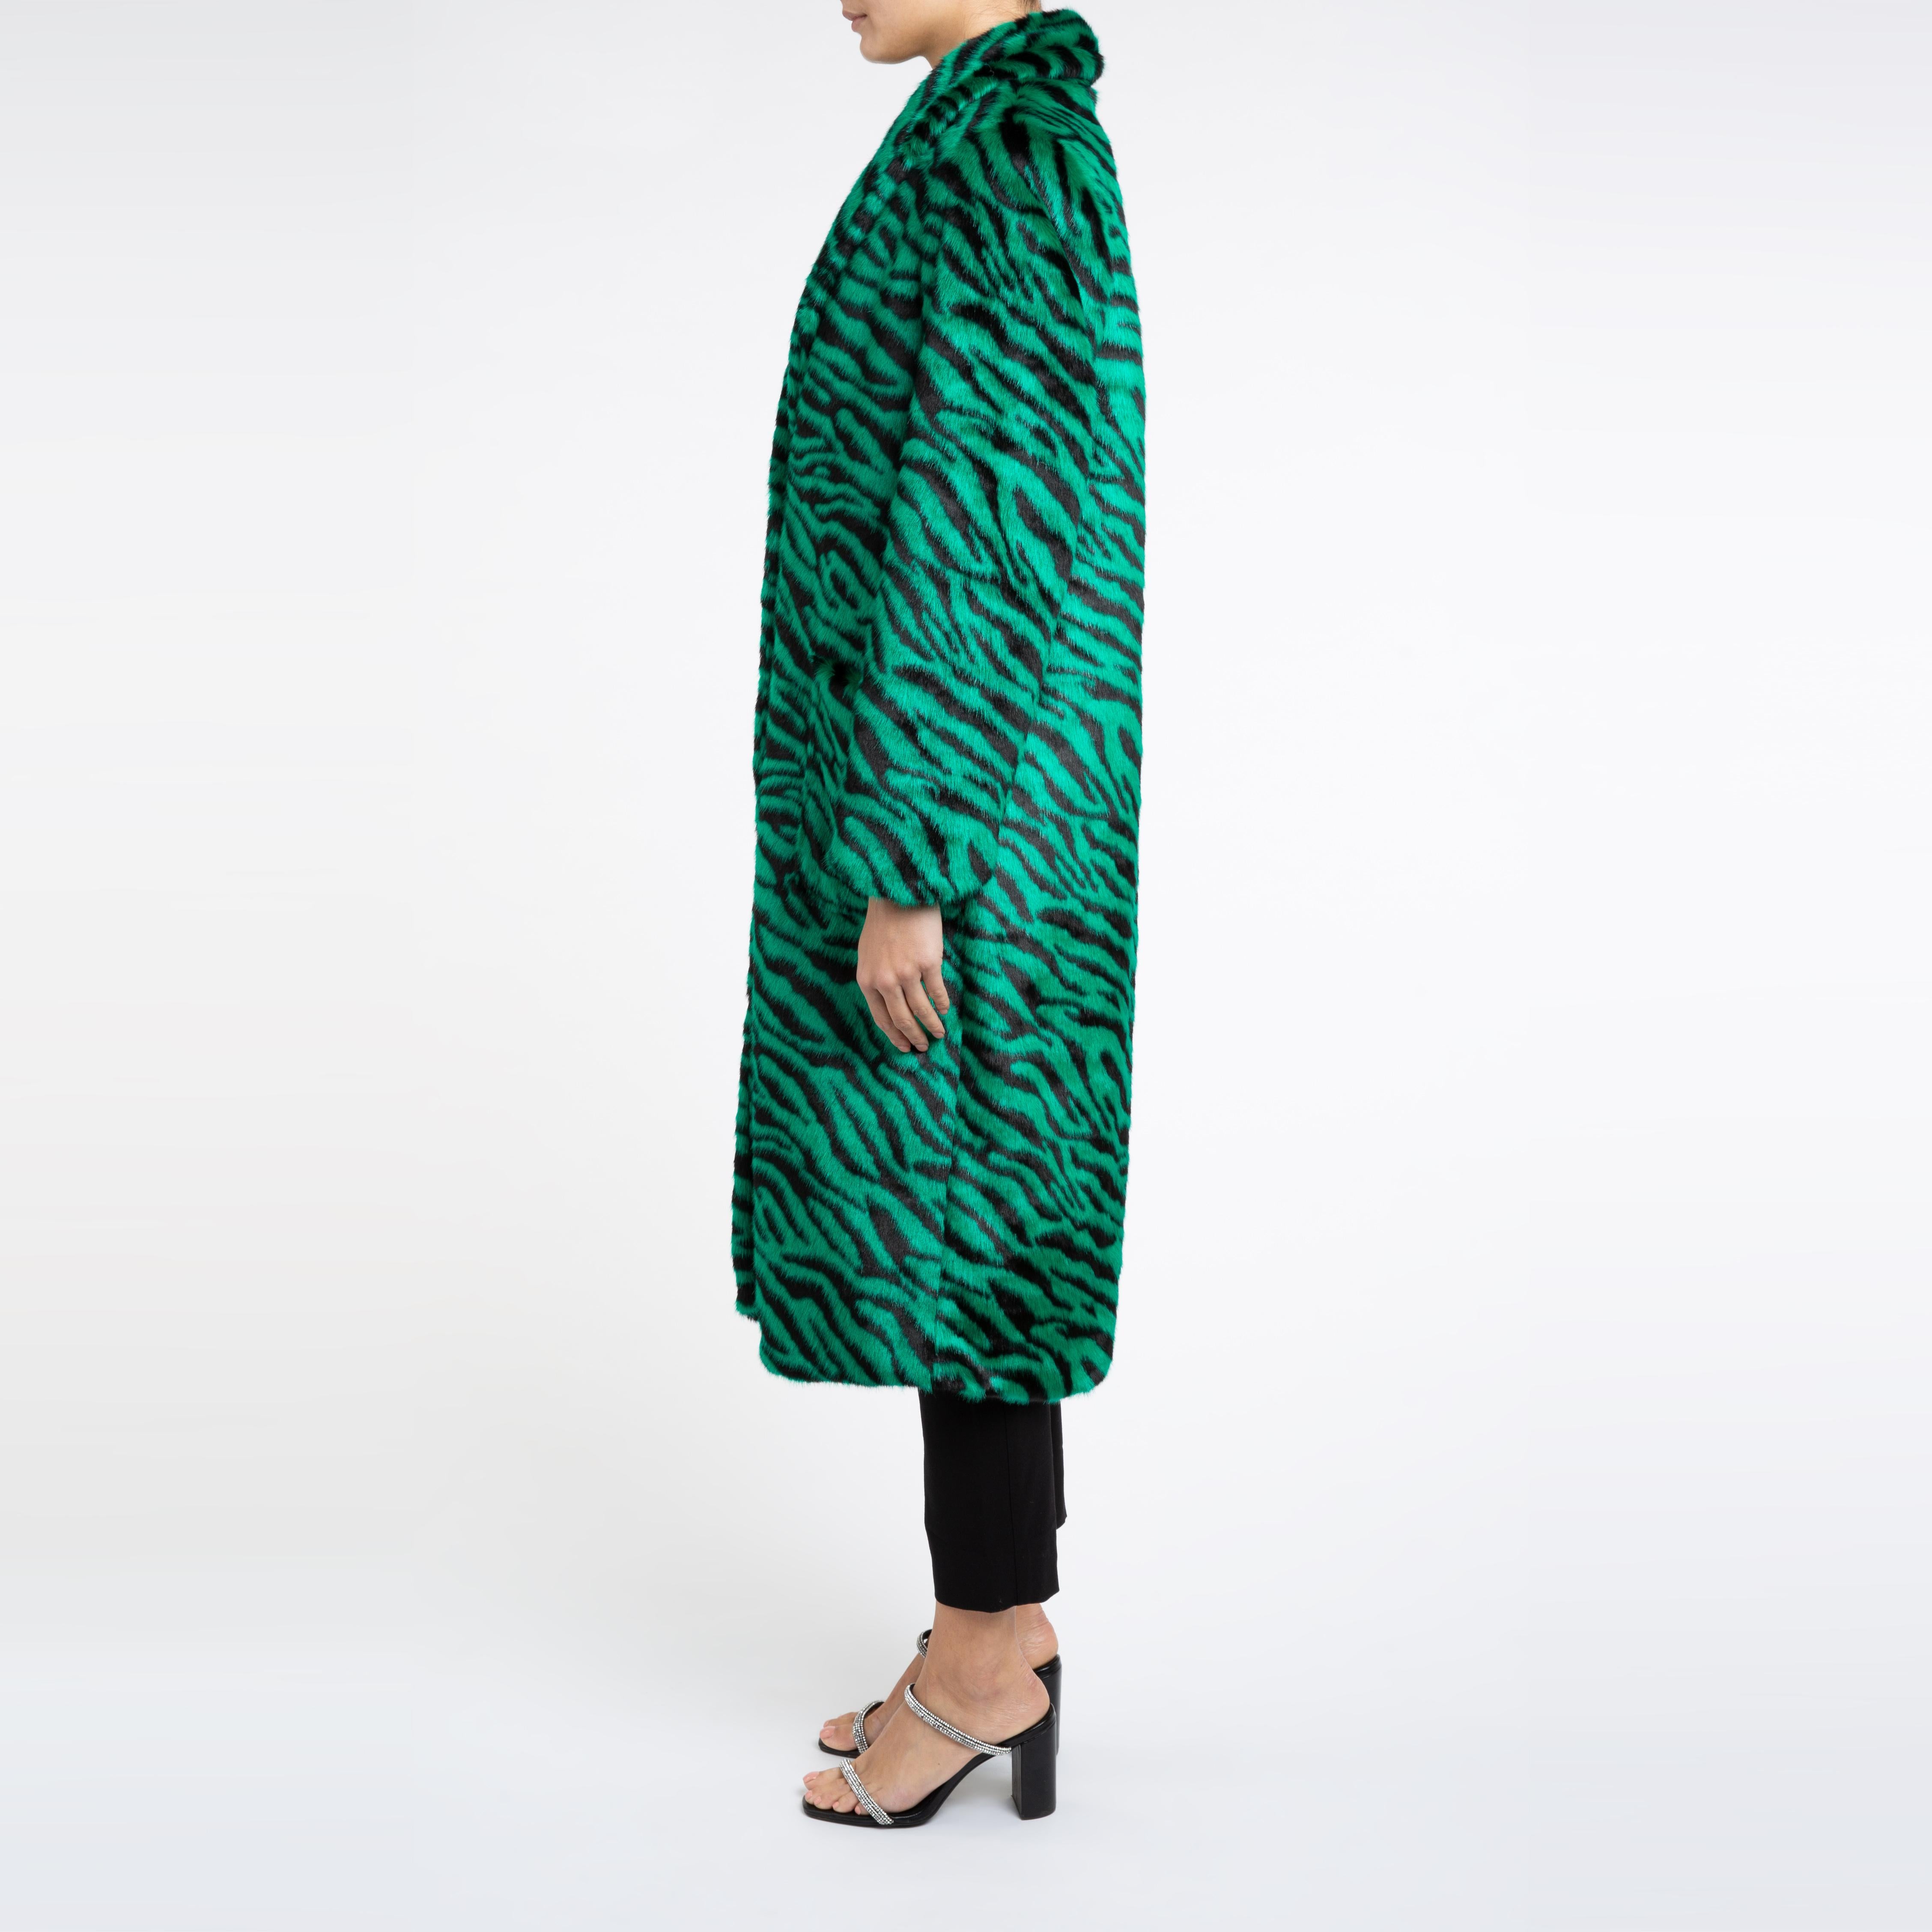 Esmeralda Faux Fur Coat in Emerald Green Zebra Print size uk 10

A coat for dressing up and down with jeans or a dress and to keep you cosy for the cold weather. 
This longline design is flattering and easy to wear with jumpers etc with its relaxed